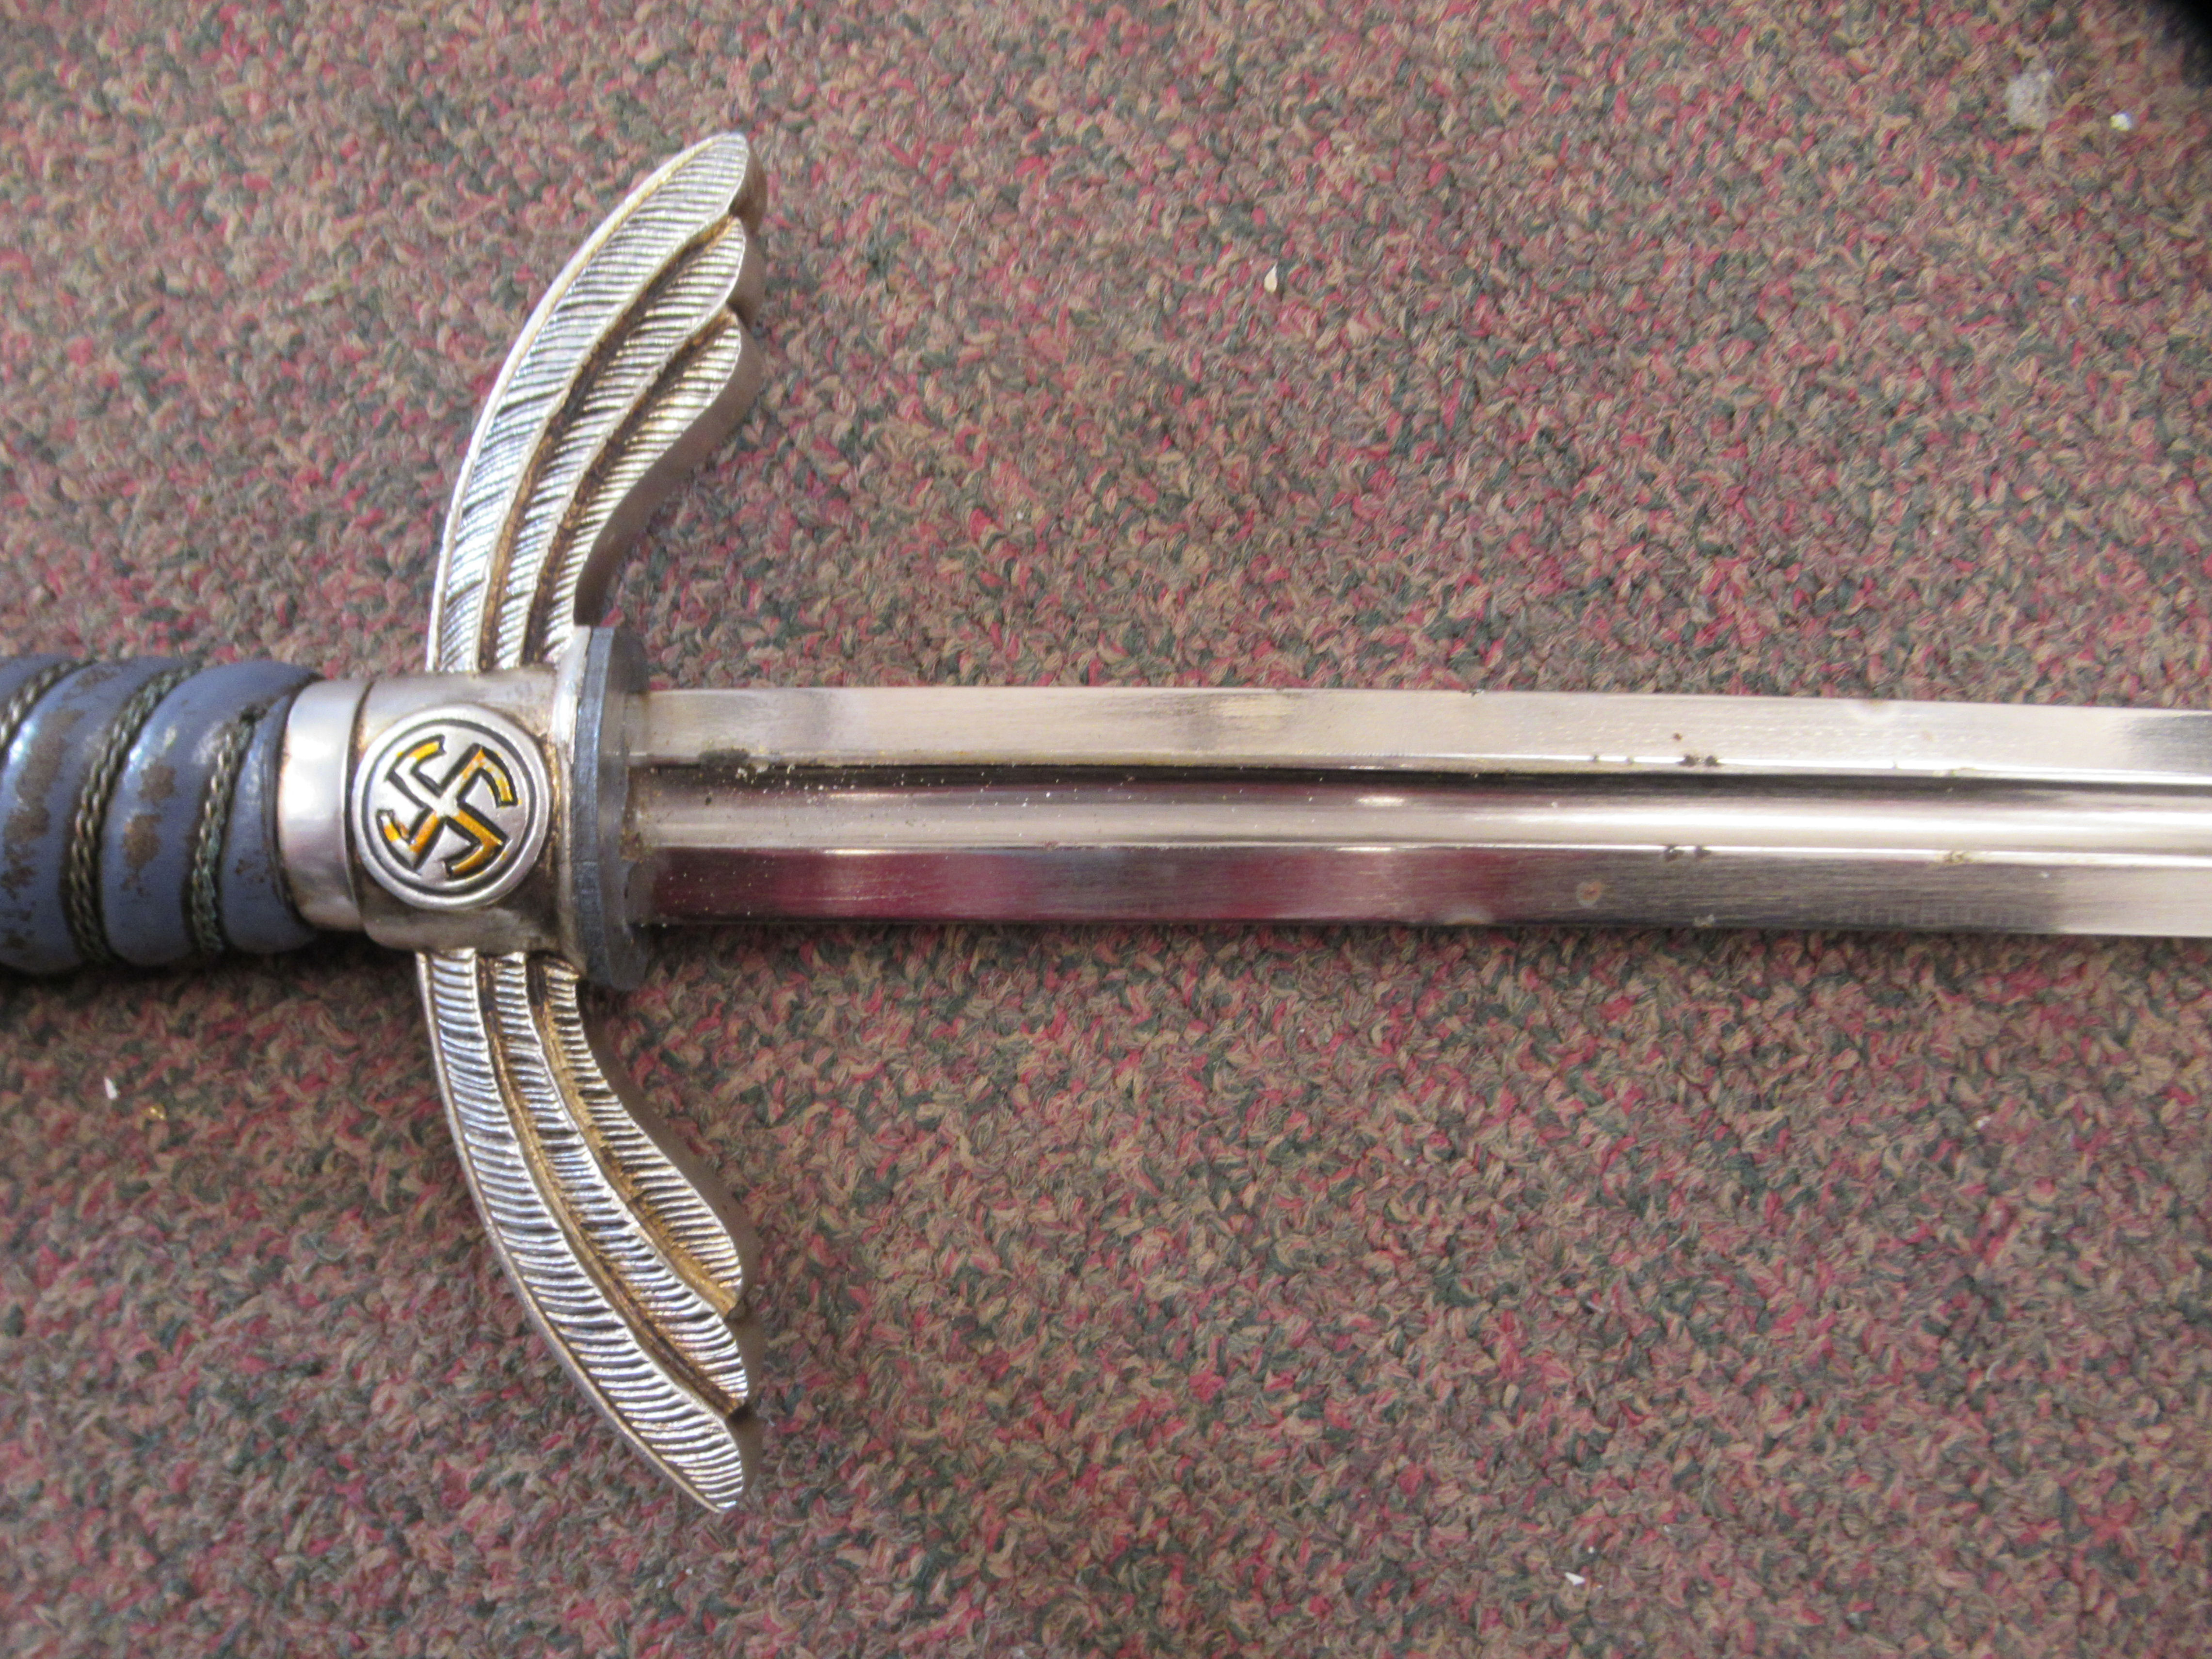 A German Luftwaffe dress sword with swastika emblems on the pommel and hilt, a woven wire bound - Image 5 of 7